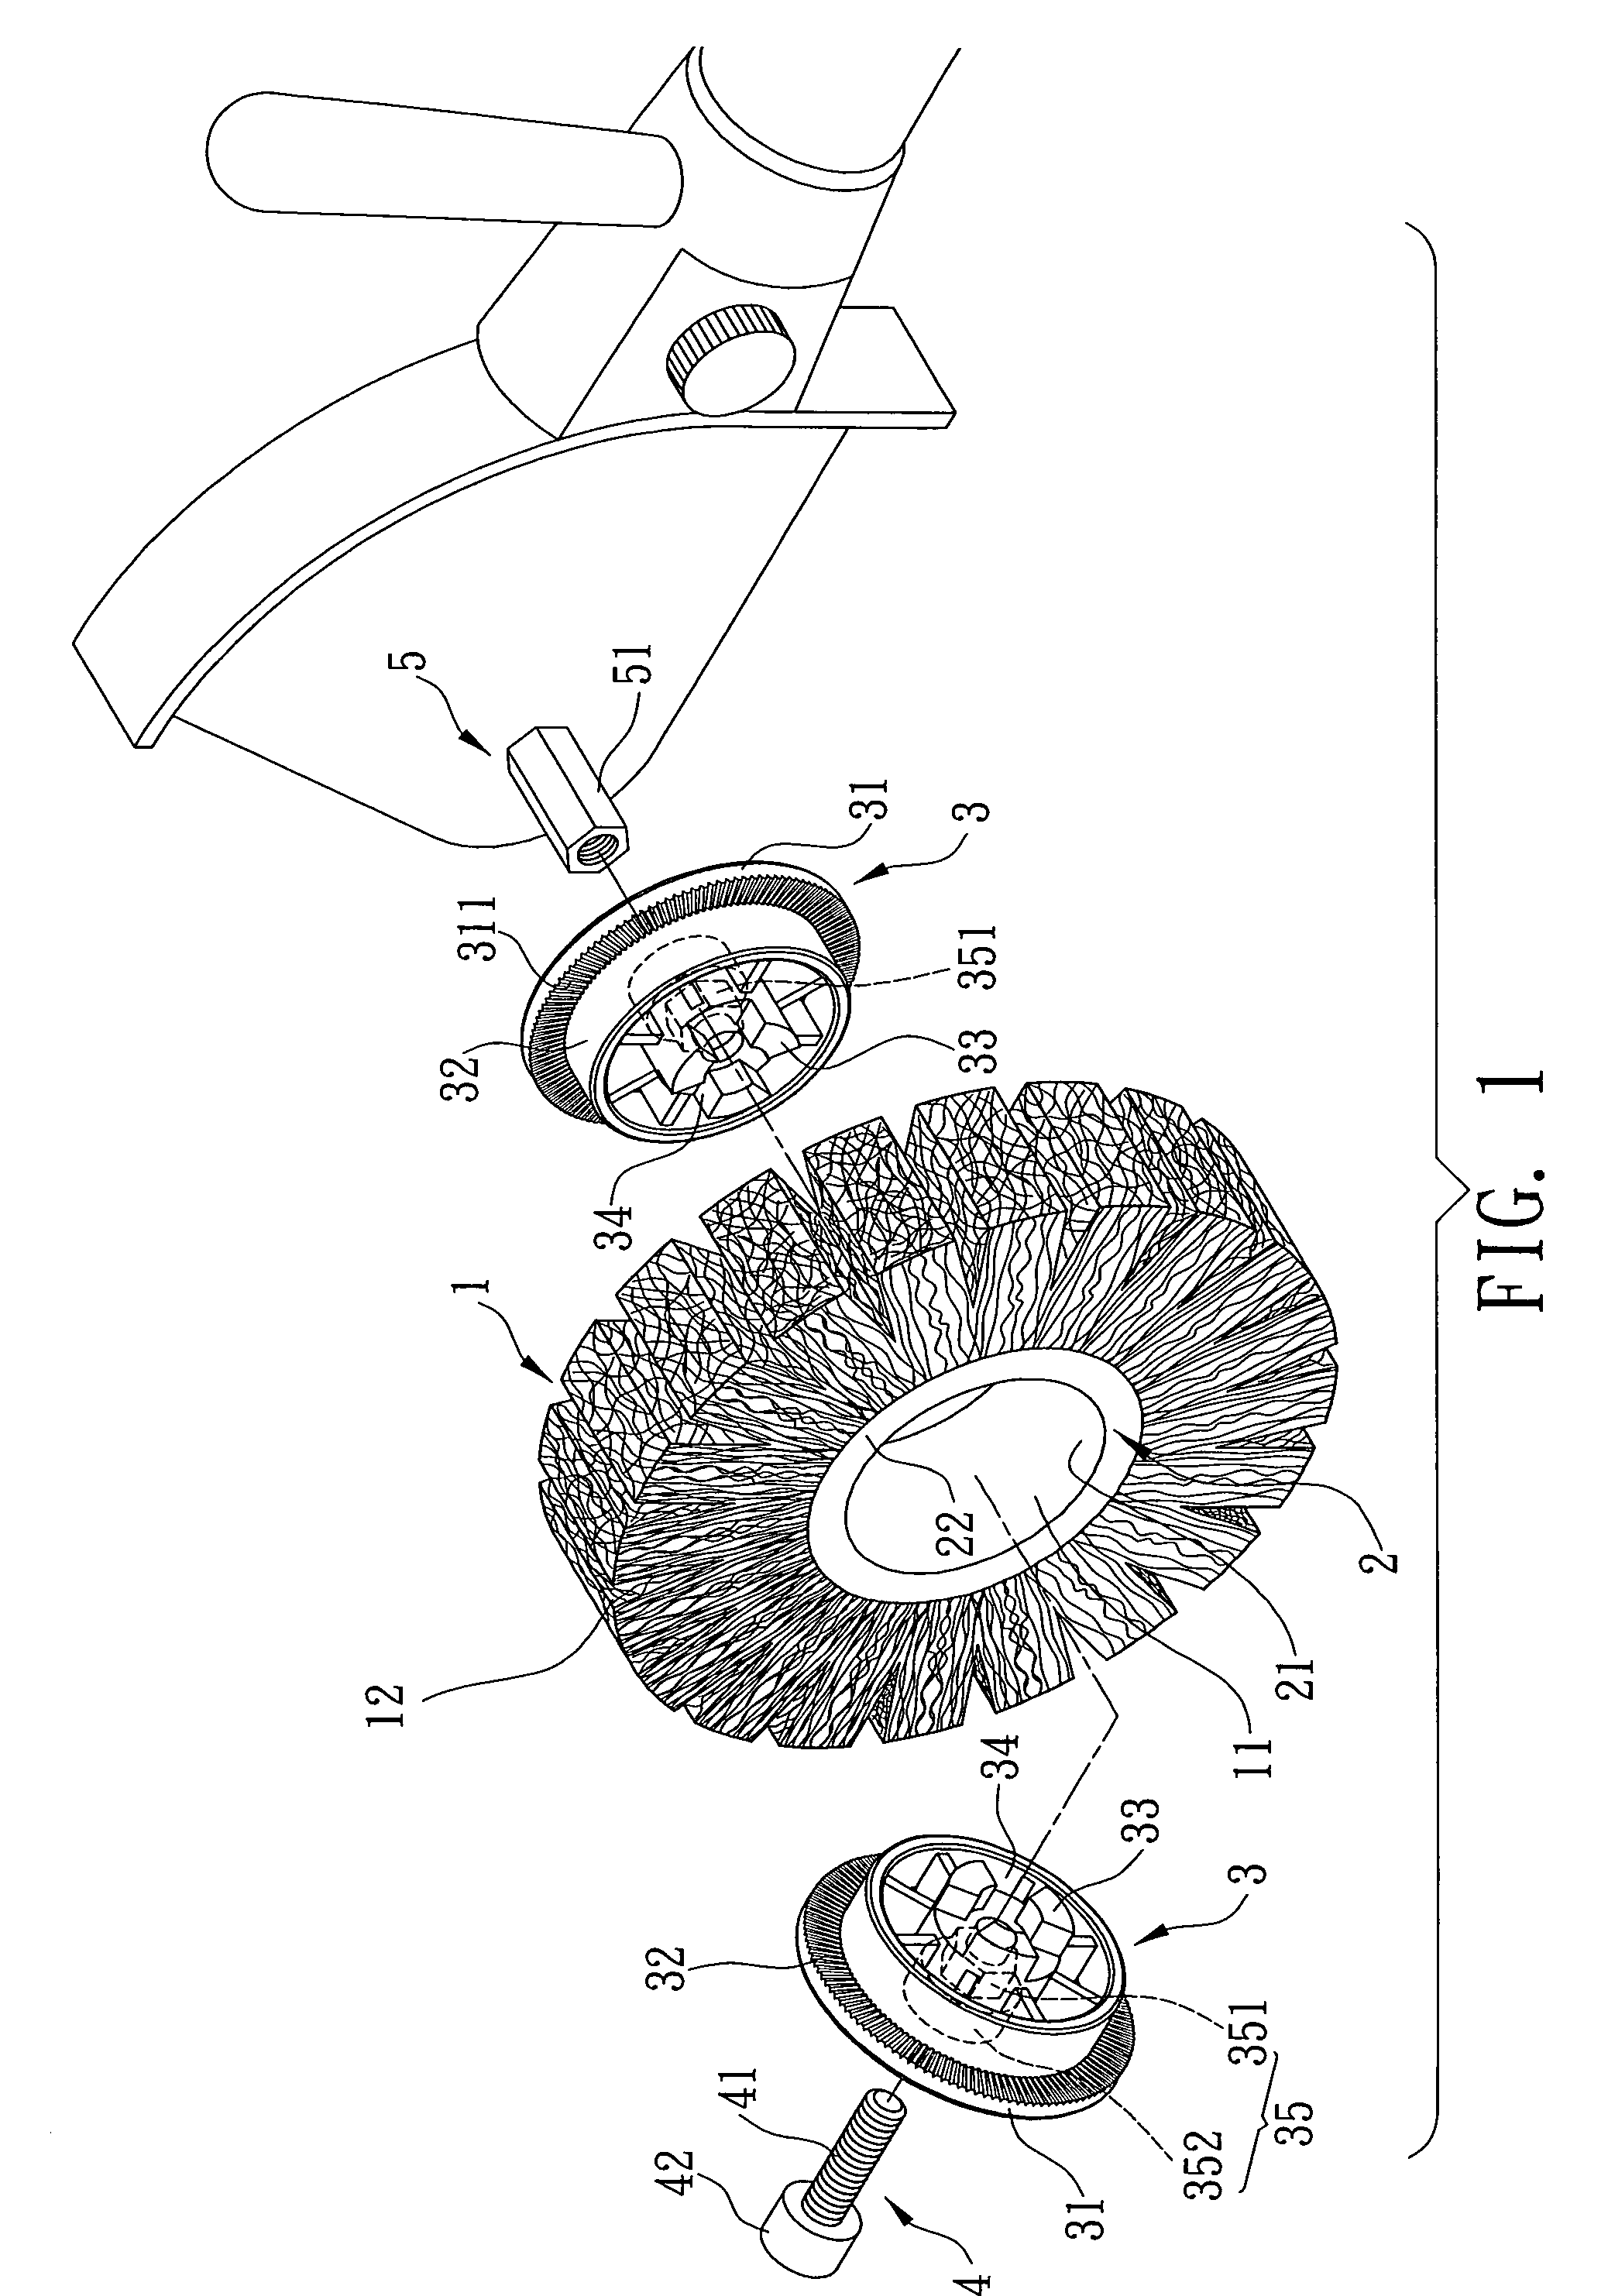 Abrasive wheel with improved composing structure